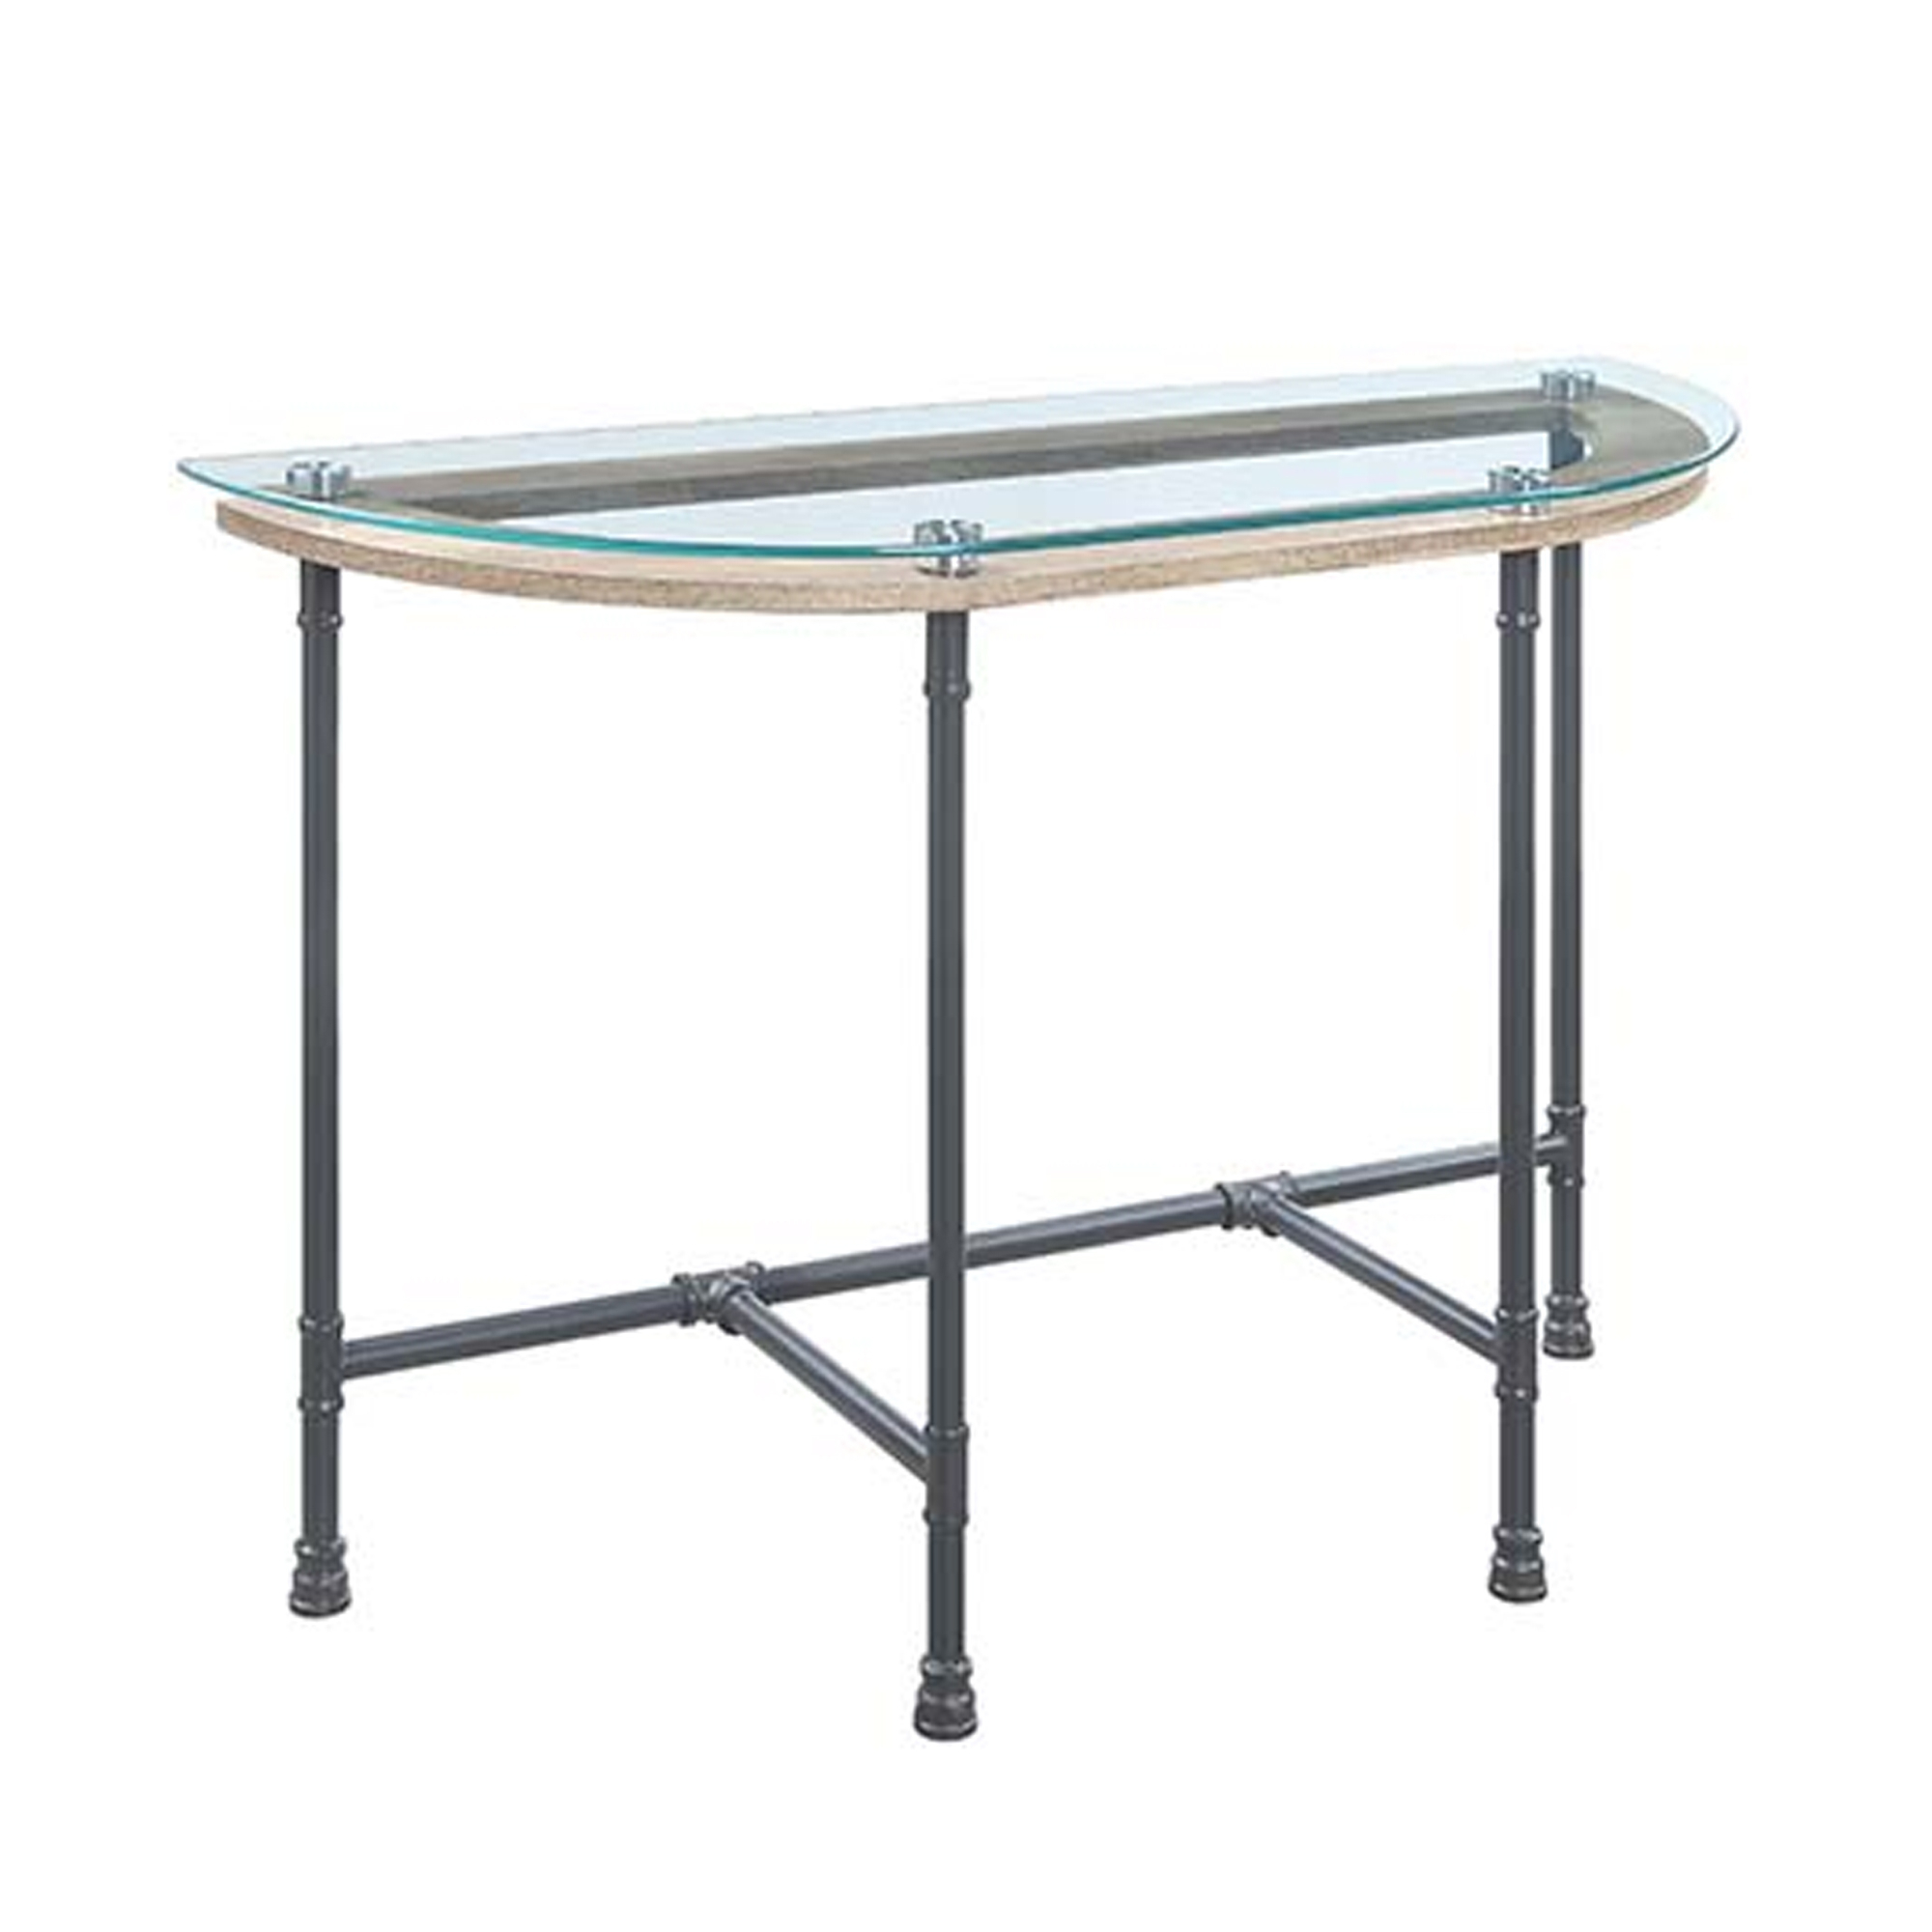 Wood Side Table, Oval Tempered Glass Top, Metal Pipe Style Legs, Clear Glass, Sandy Gray- Saltoro Sherpi